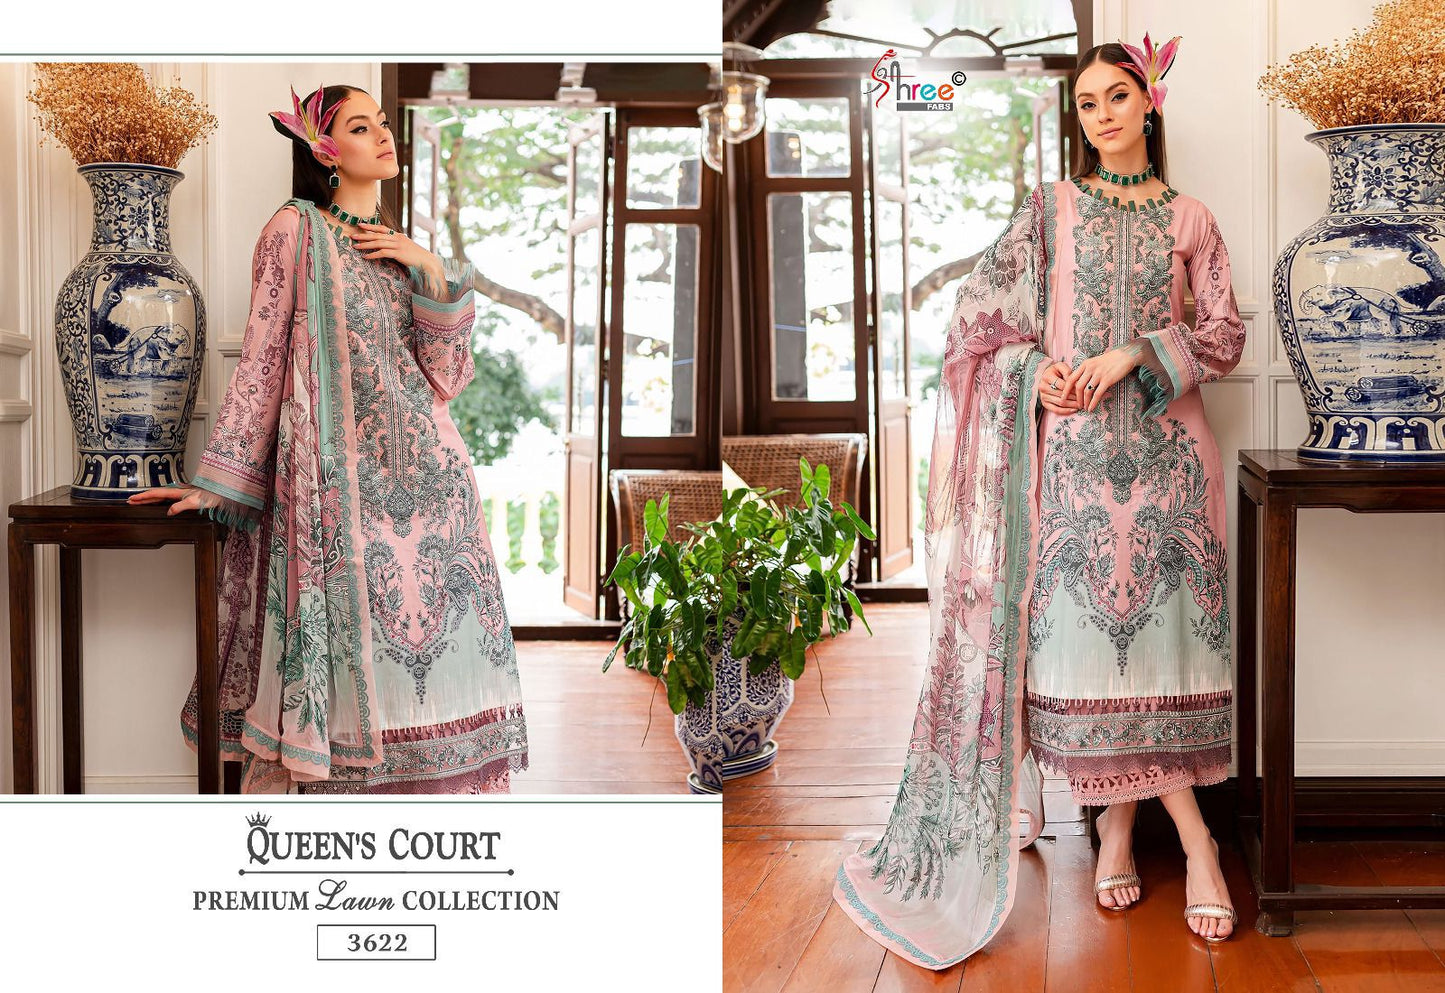 Queens Court Premium Lawn Collection Shree Fabs Pure Cotton Pakistani Patch Work Suits Manufacturer India